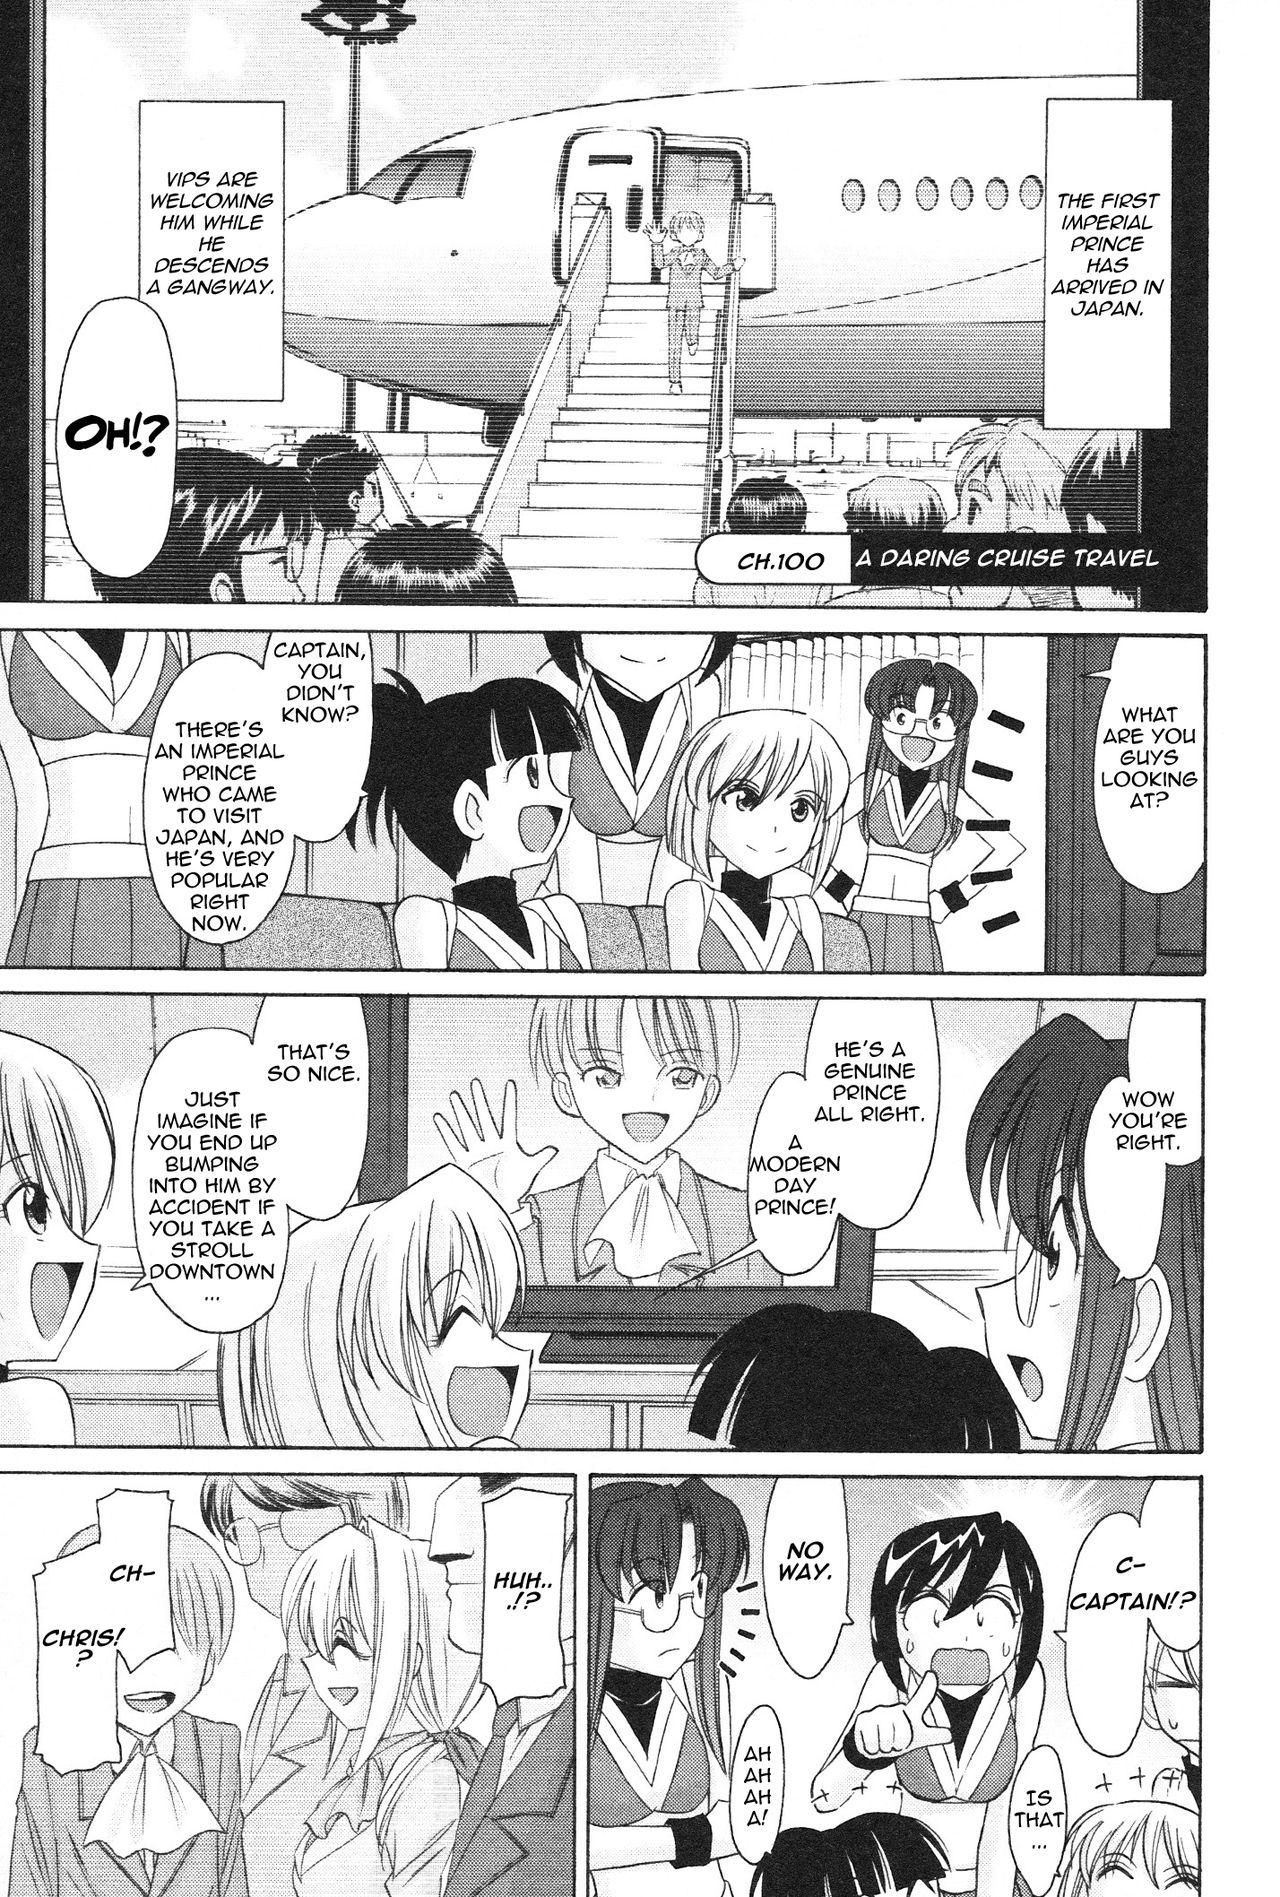 Best Blowjob Cheers! 12 Ch.100 Hentai - Page 2